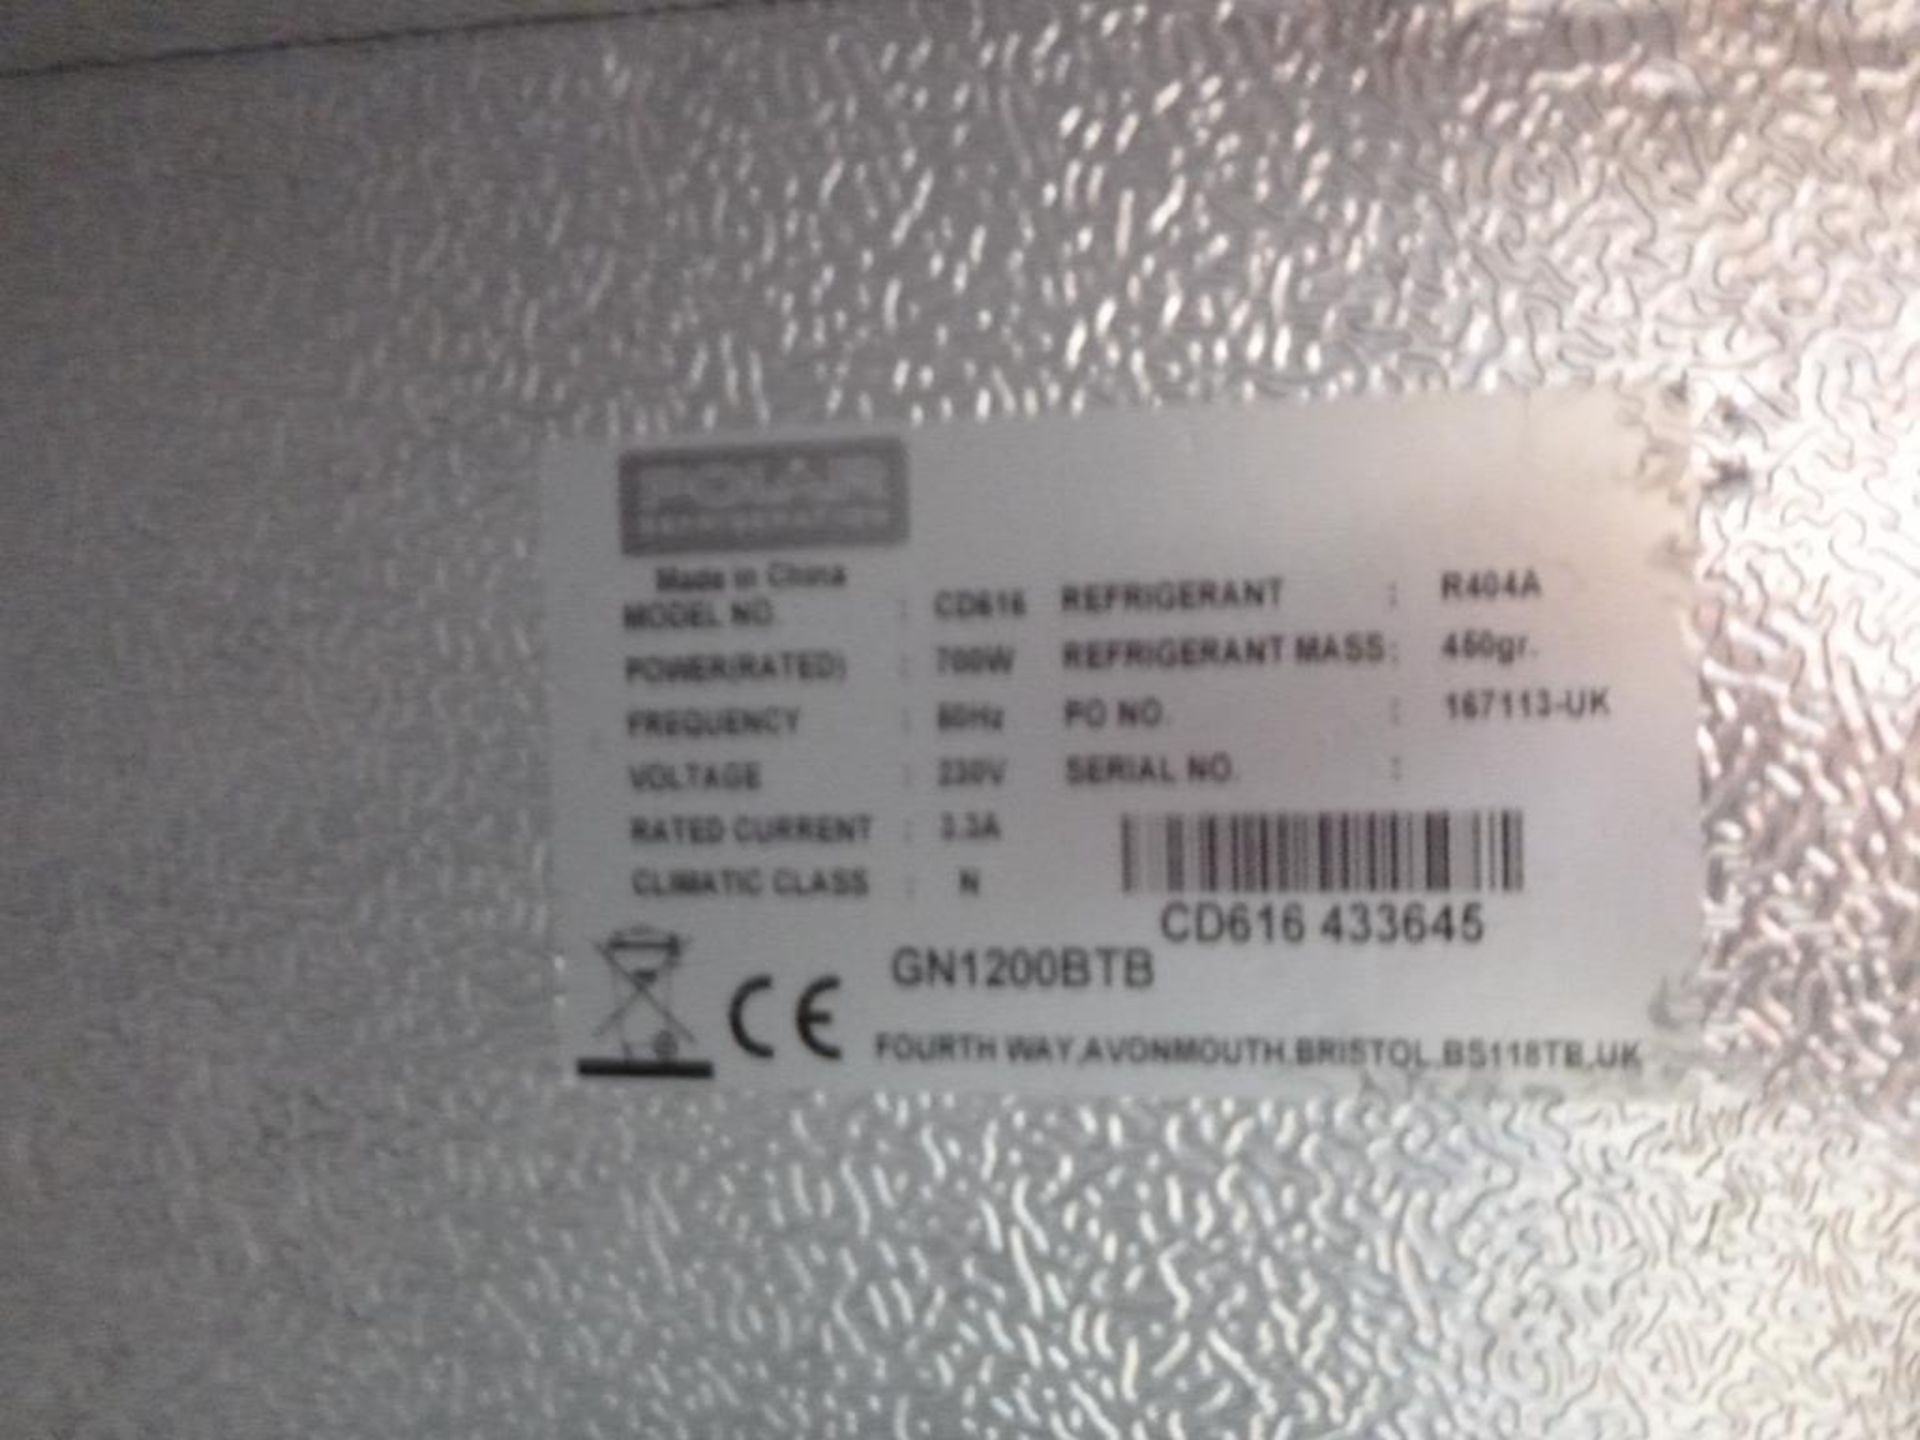 A Large Industrial Polar Refridgeration CD616/GN 1200 BTB Double Door Freezer. Please note there - Image 2 of 2